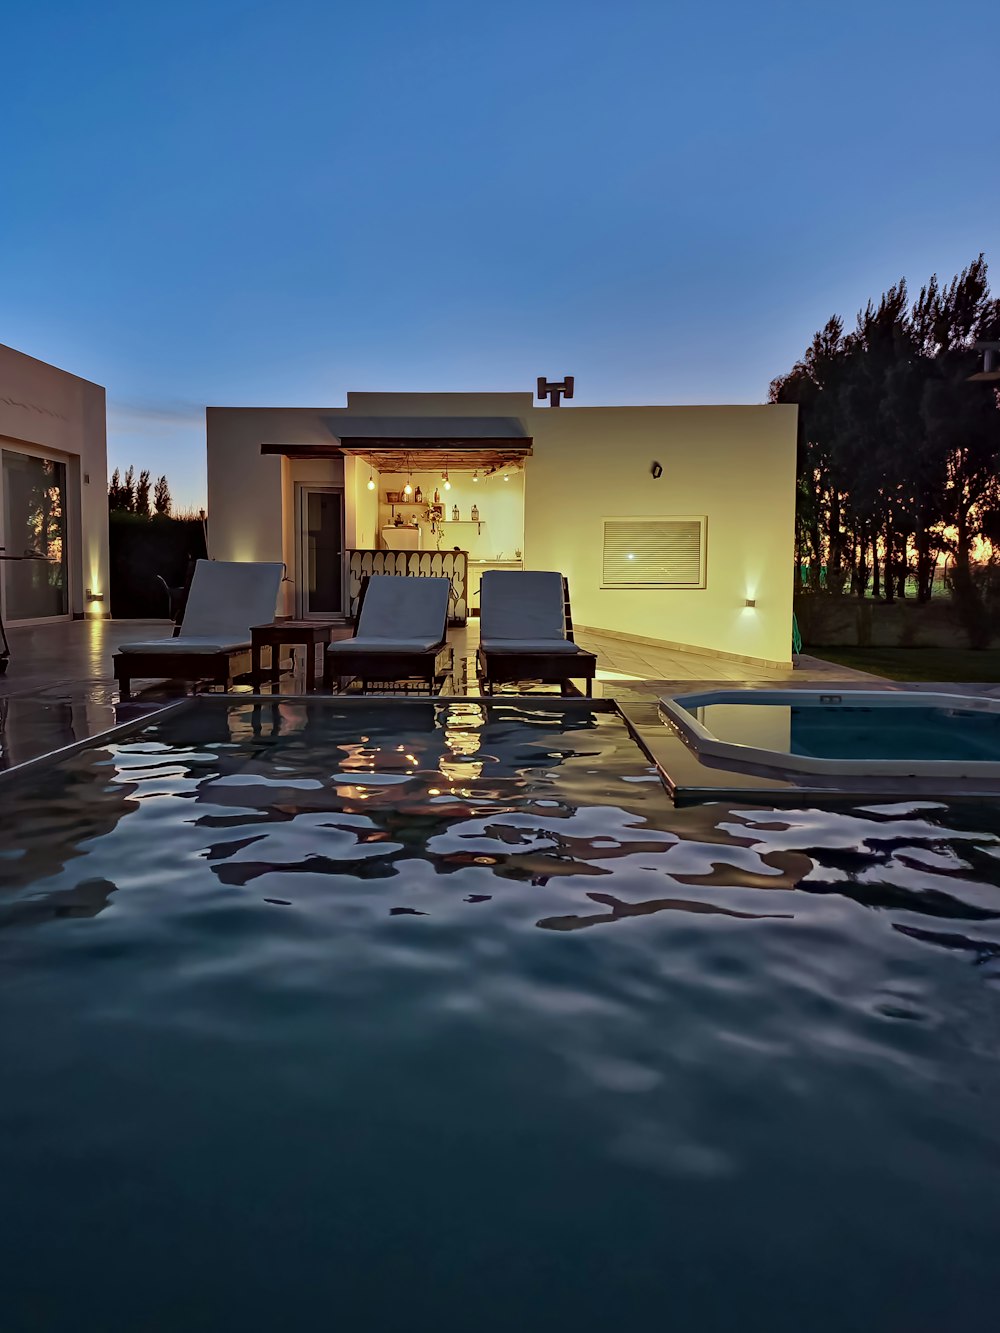 a house with a swimming pool at night